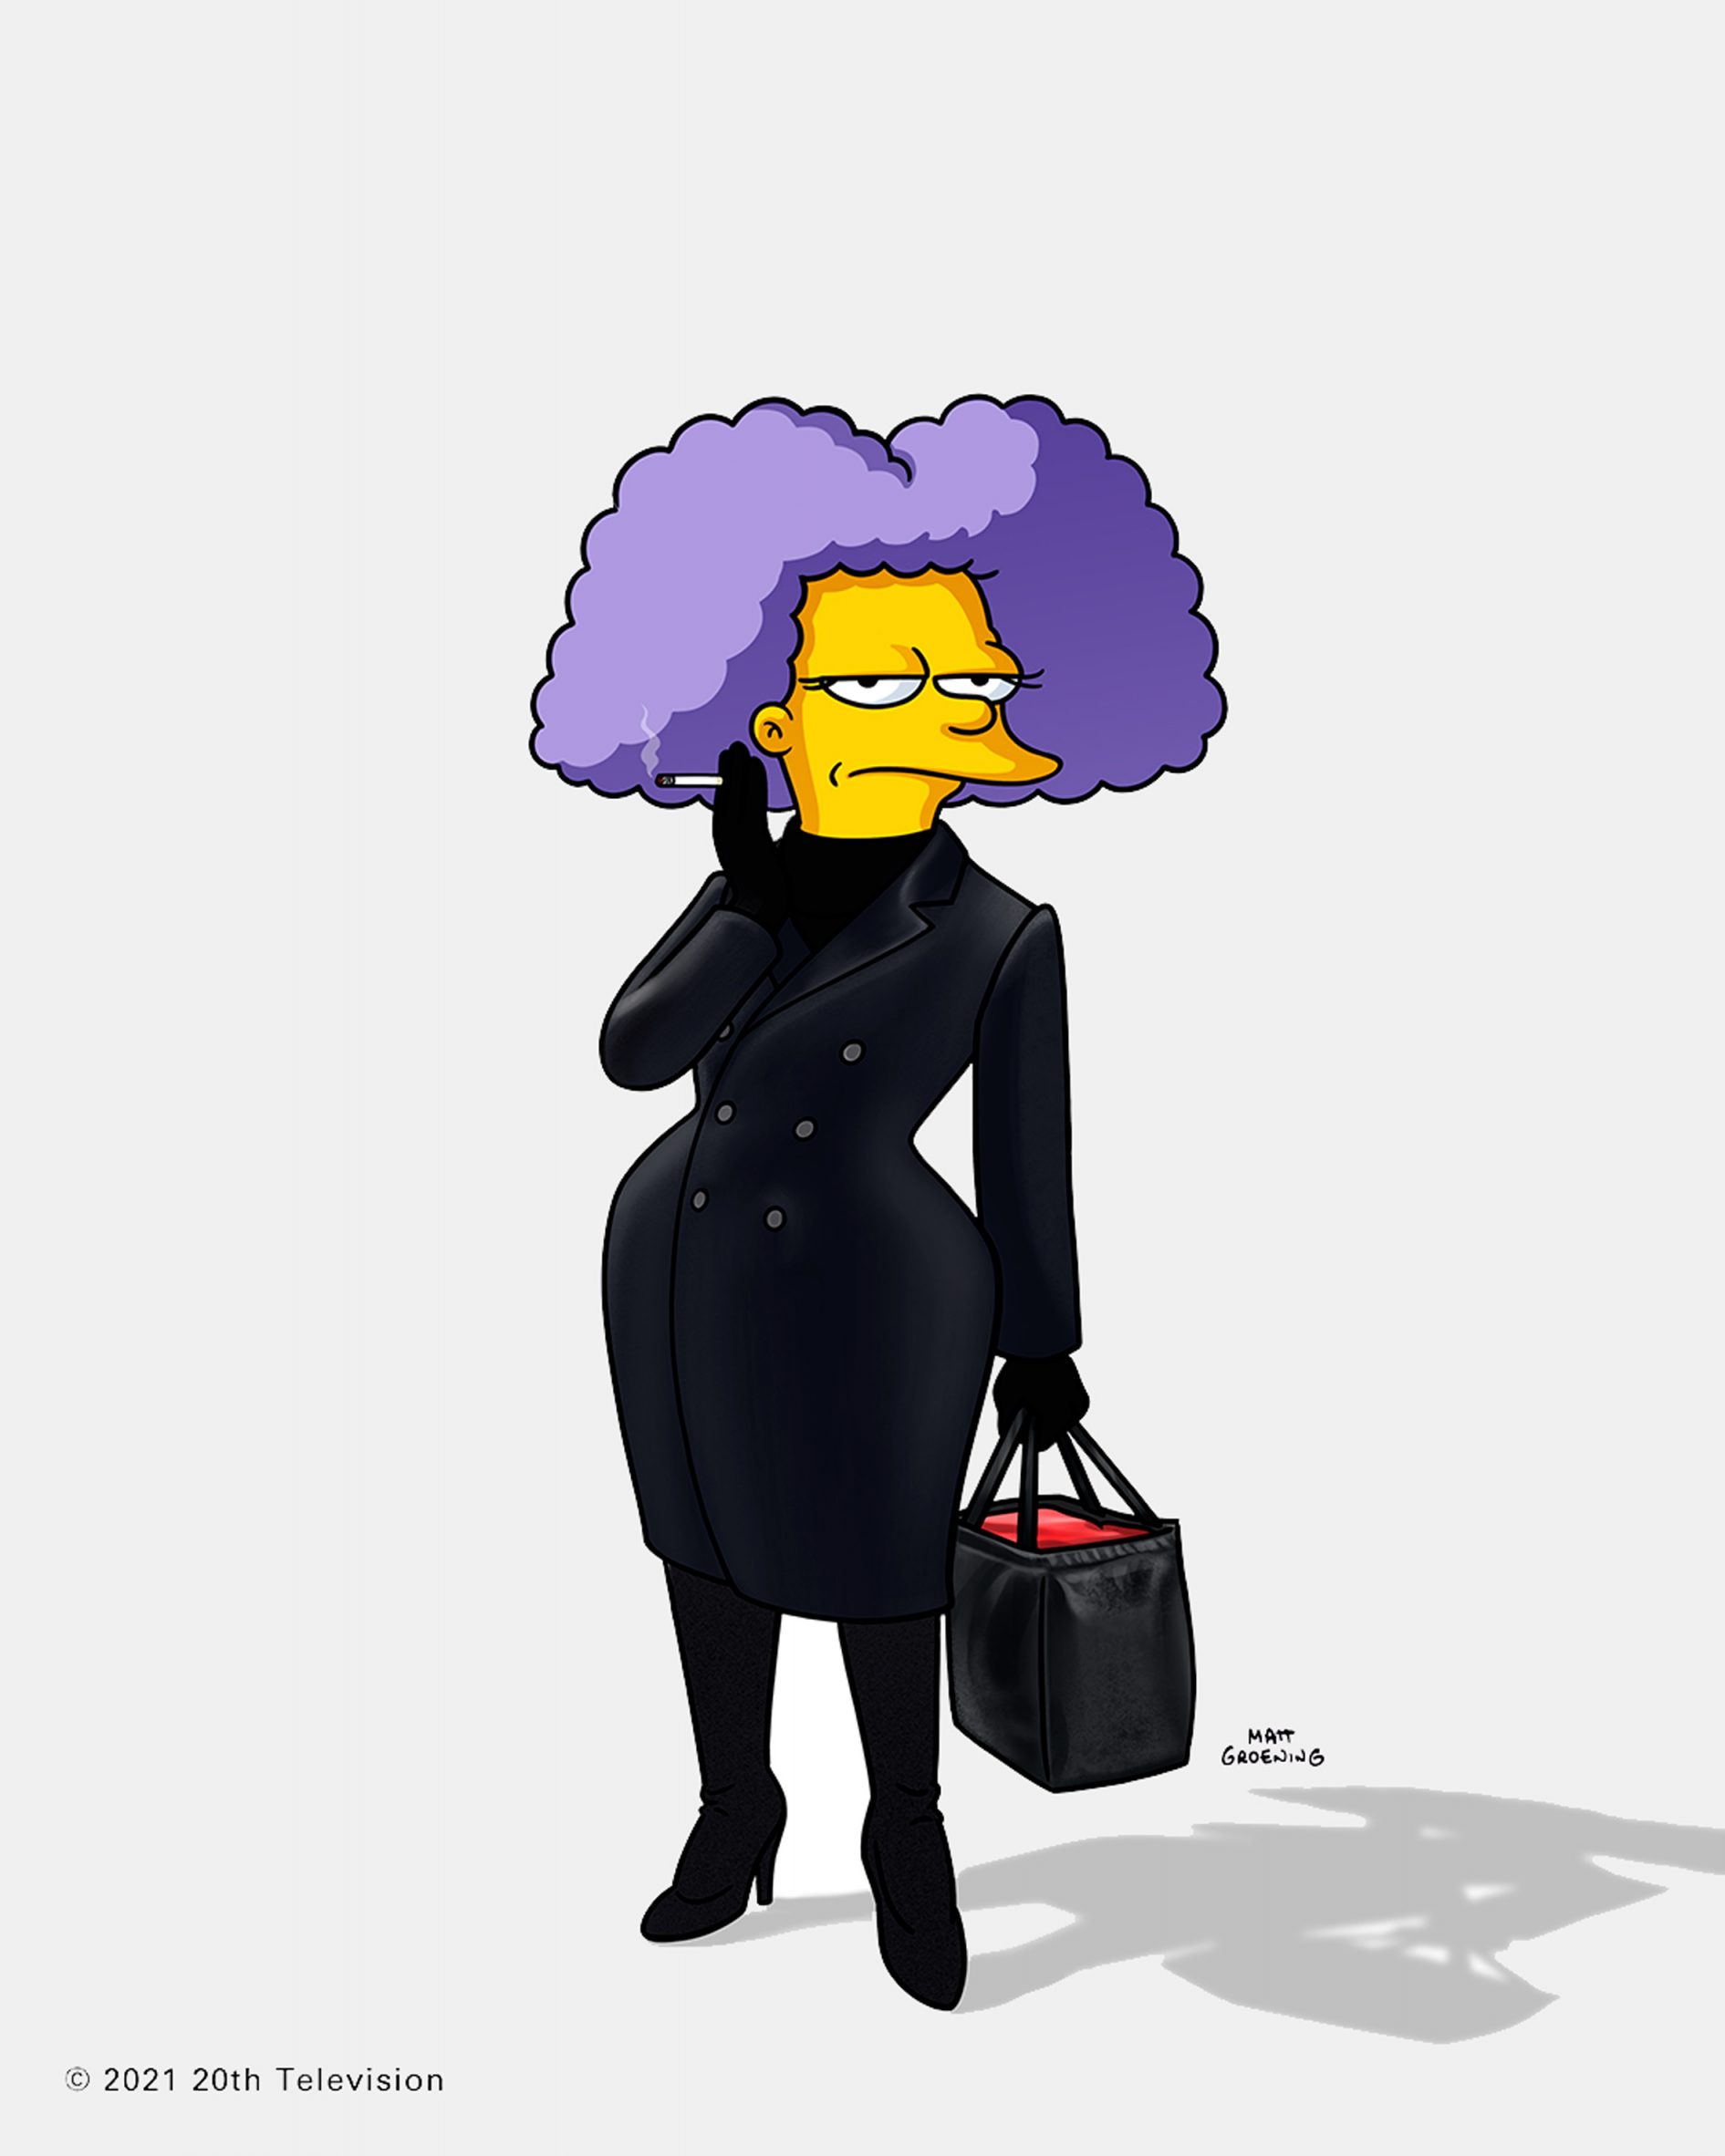 Buy Balenciaga X The Simpsons Tm   20th Television Medium Leather Tote   Black At 30 Off  Editorialist